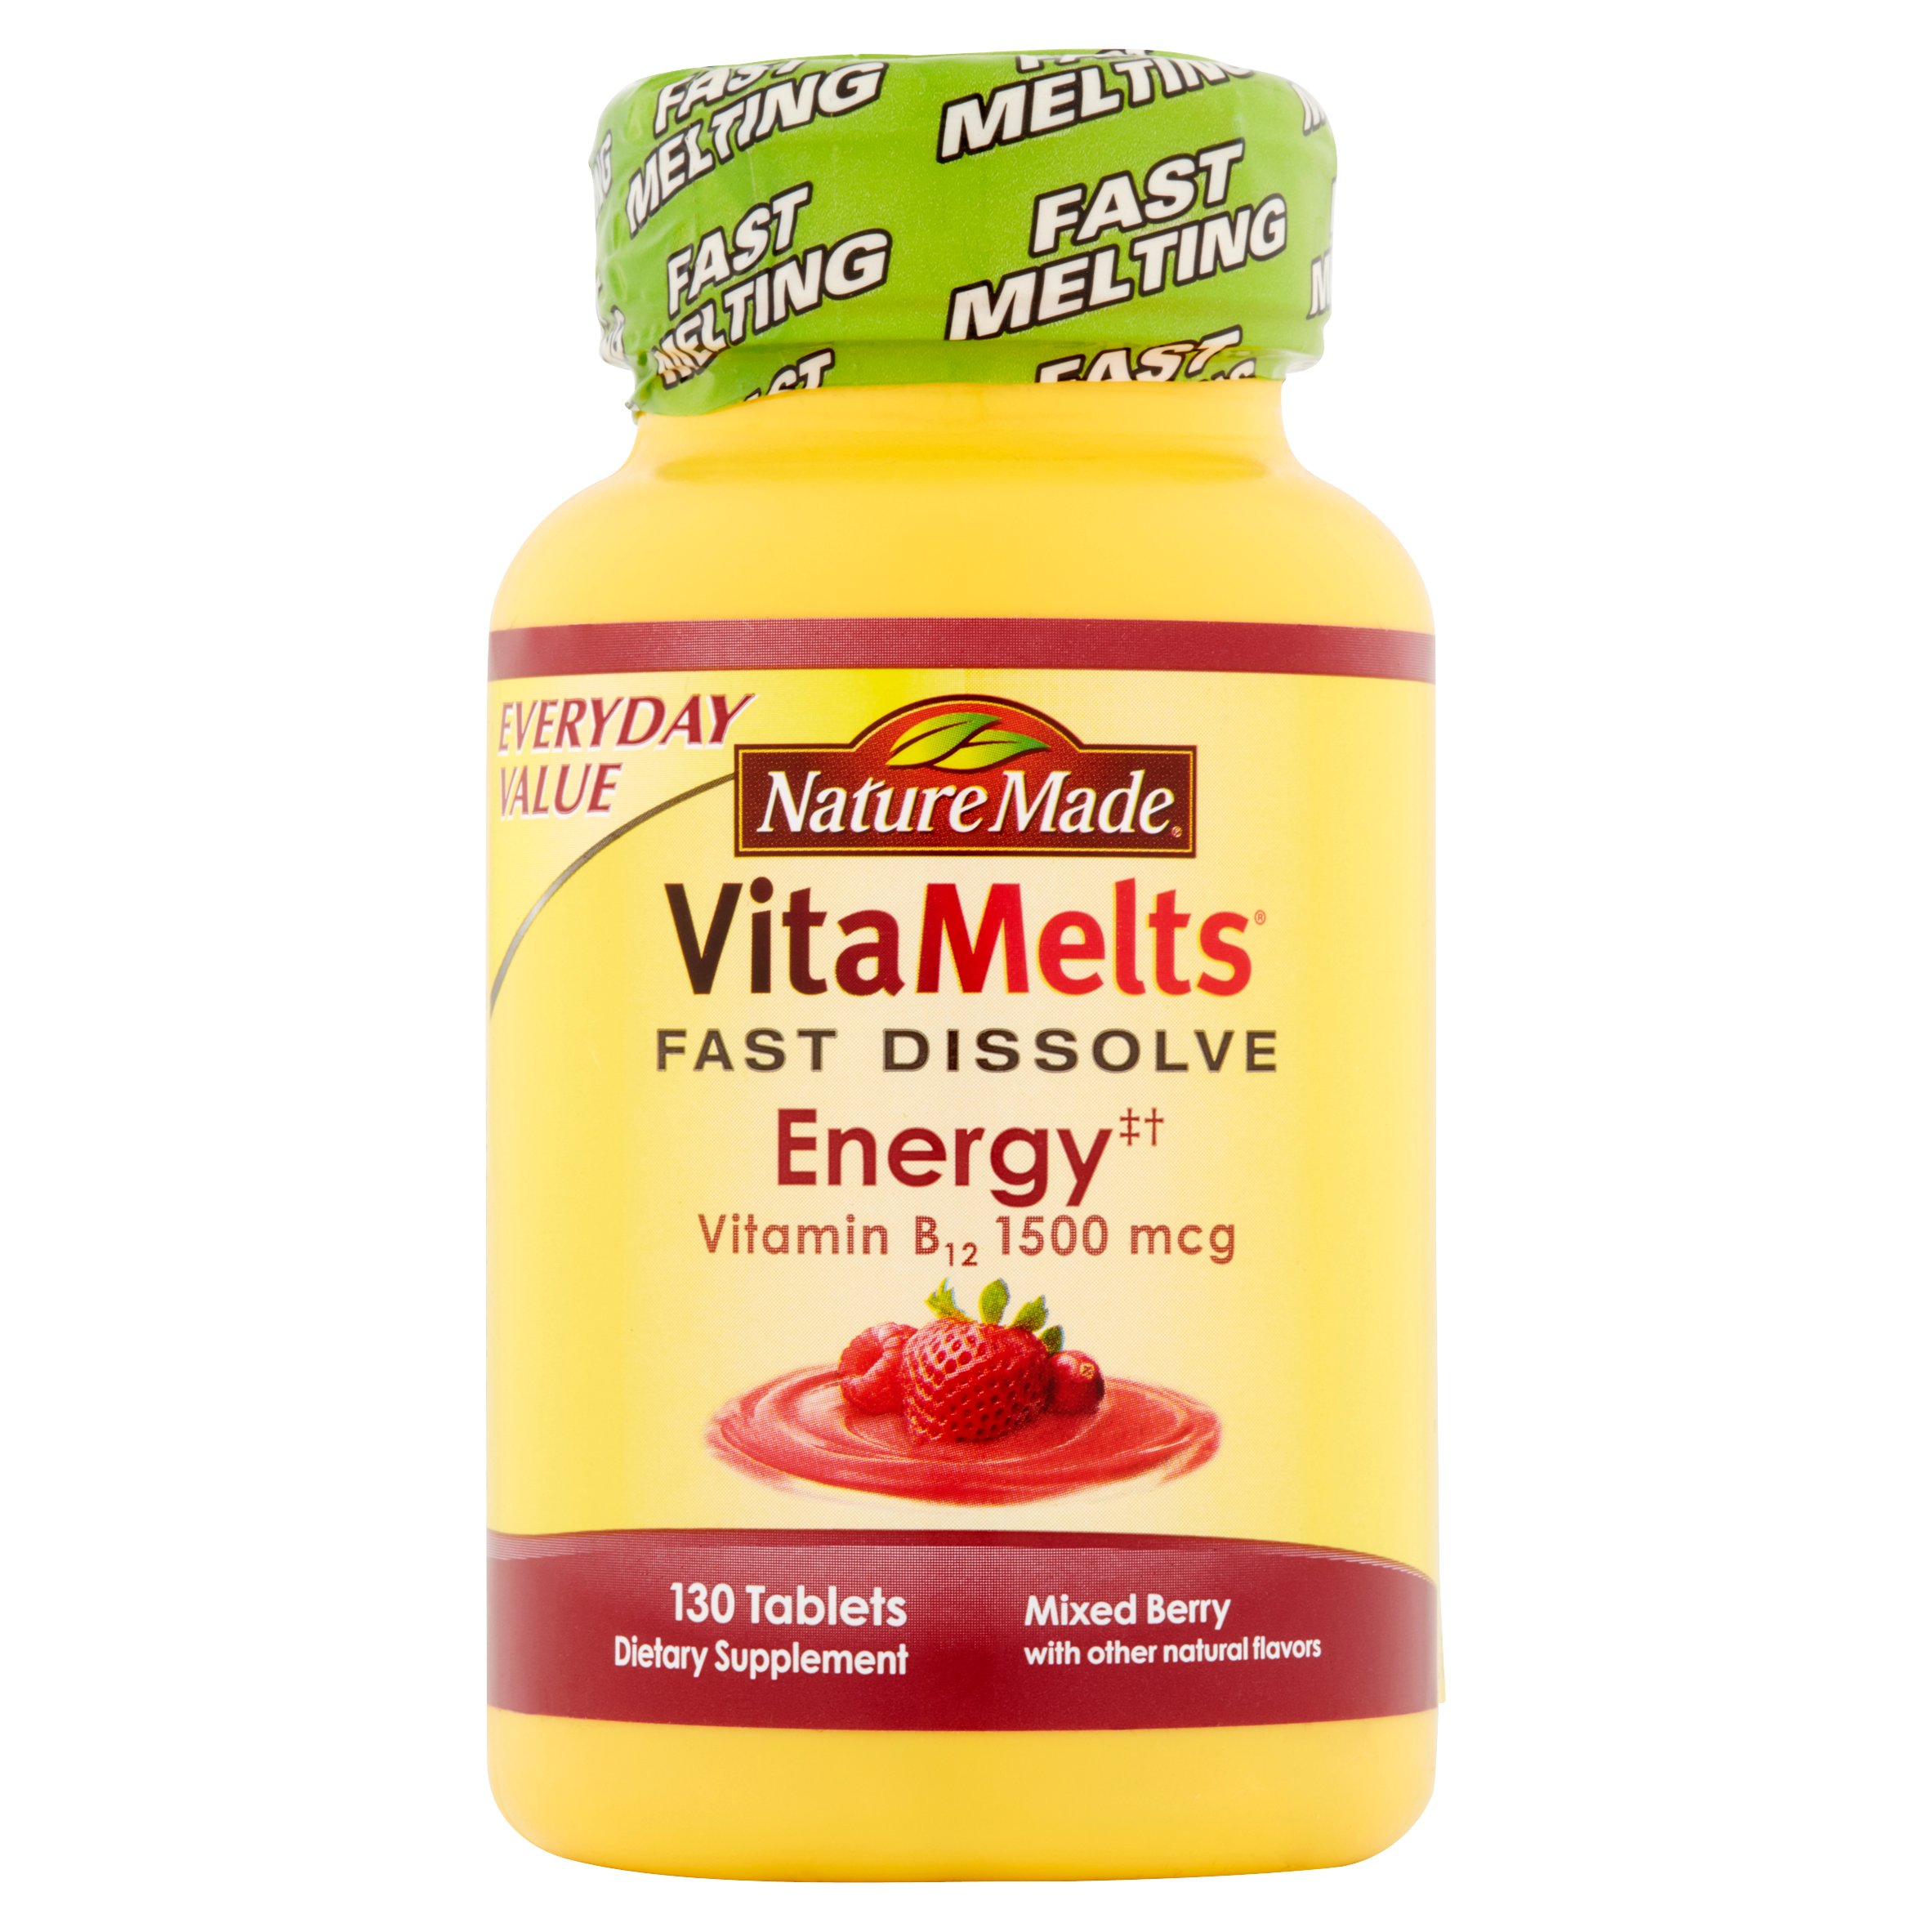 Nature Made VitaMelts Mixed Berry Vitamin B12 Fast Dissolve Tablets, 1500 mcg, 130 count - image 1 of 5